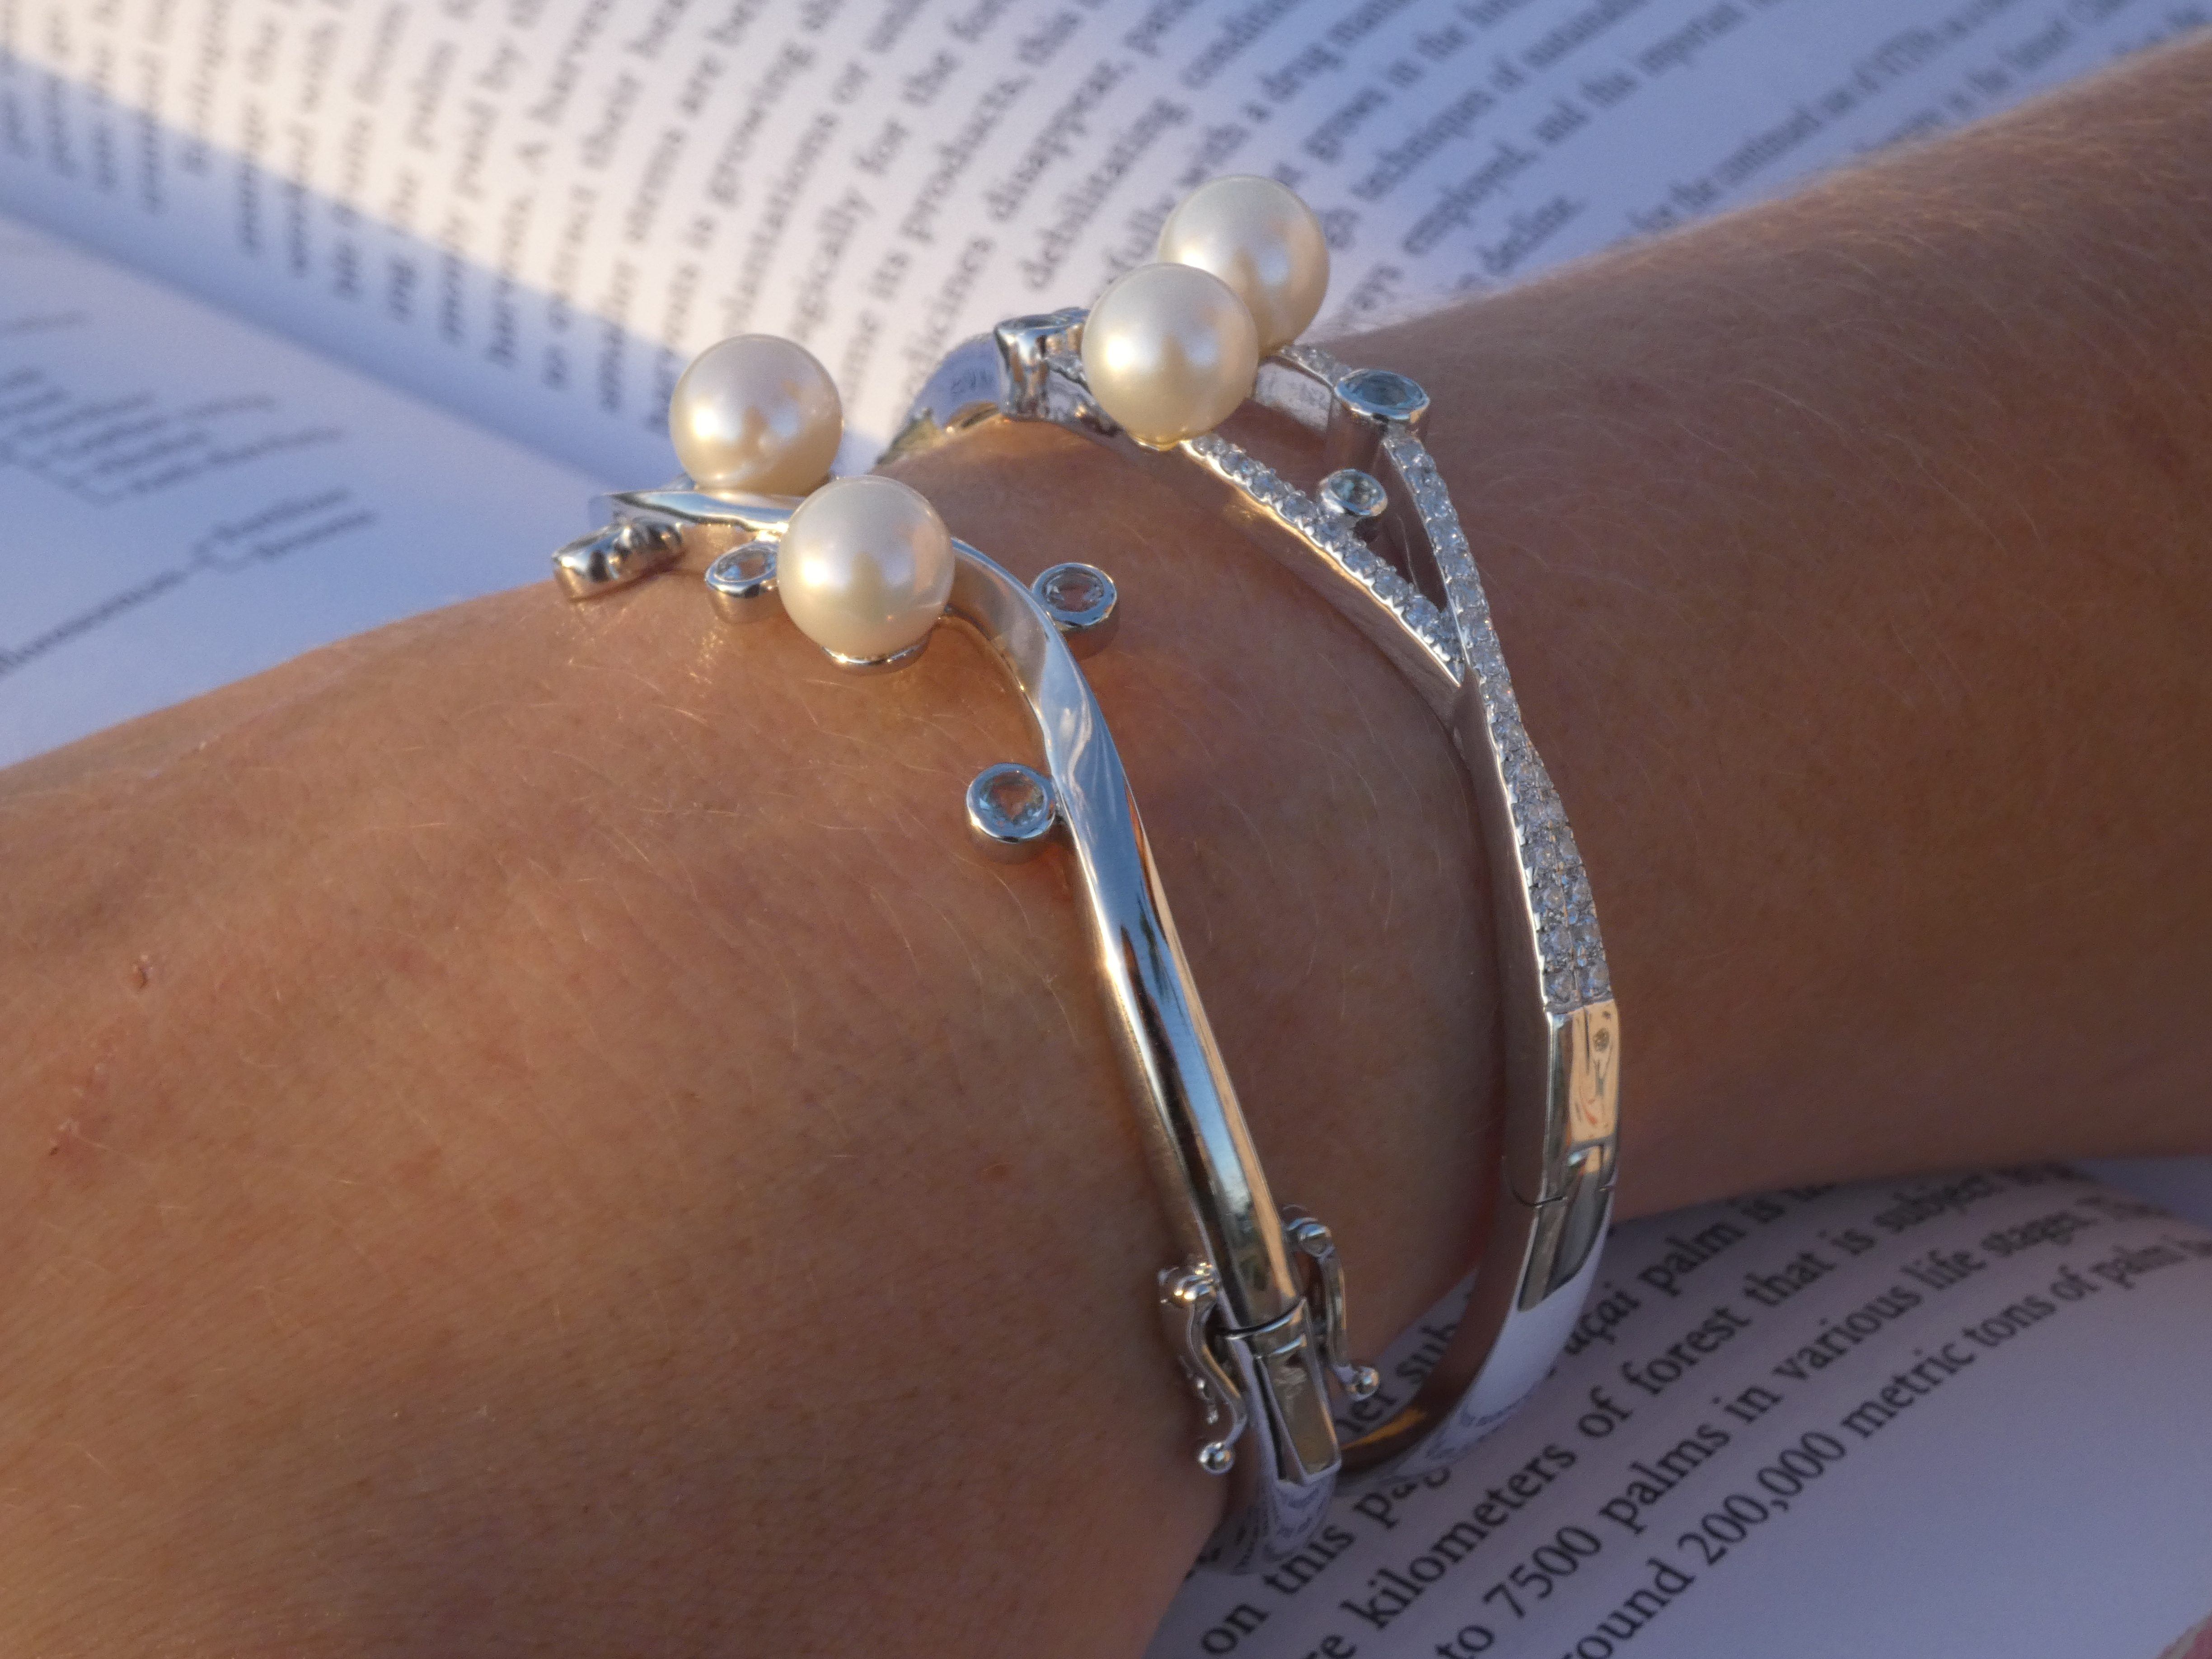 The photo shows two silver bracelets featuring pearls. 